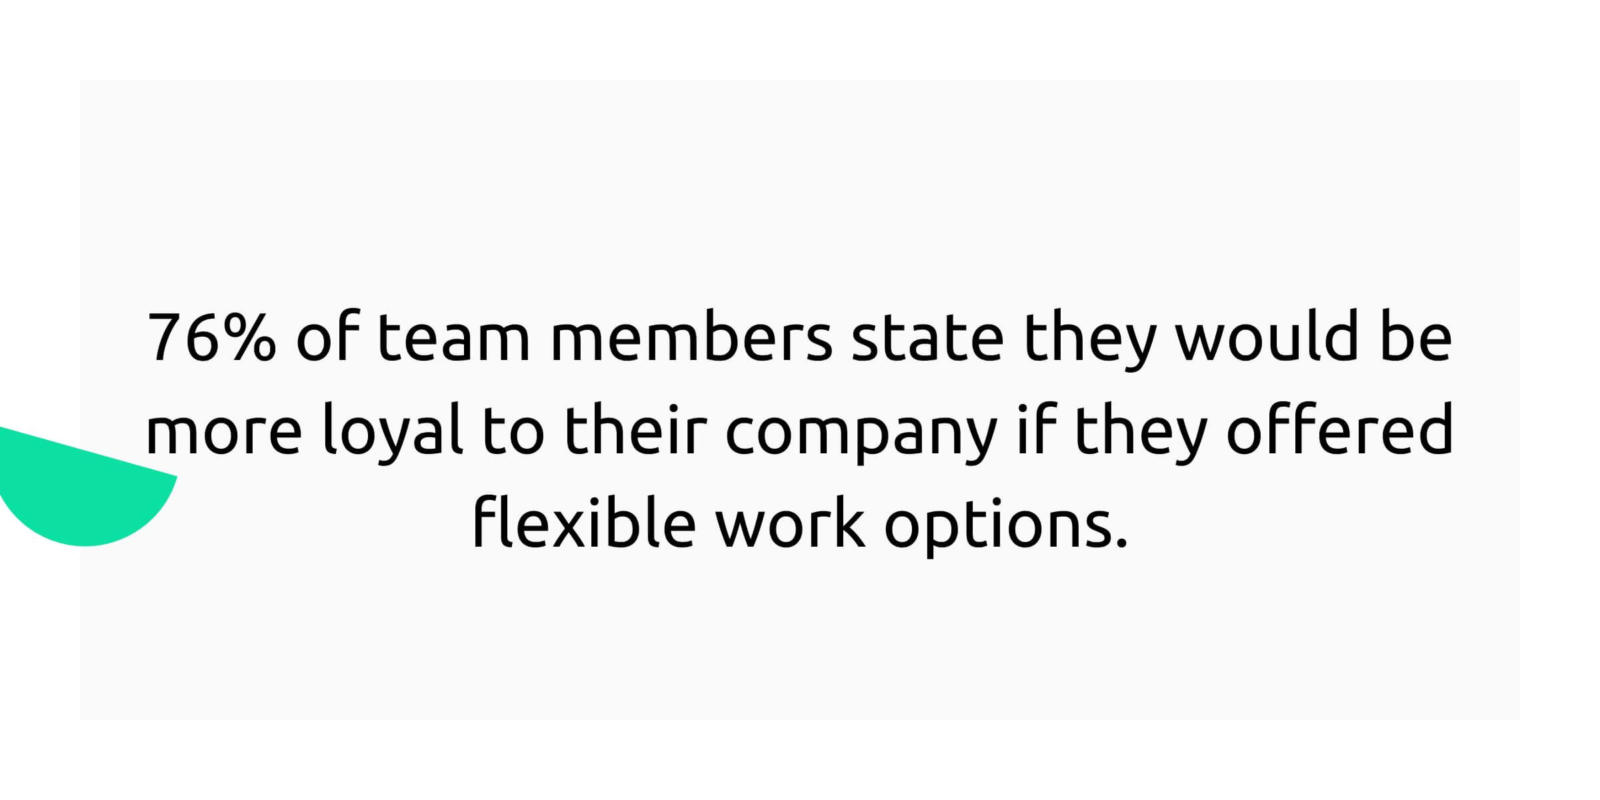 76% of team members state they would be more loyal to their company if they offered flexible work options.